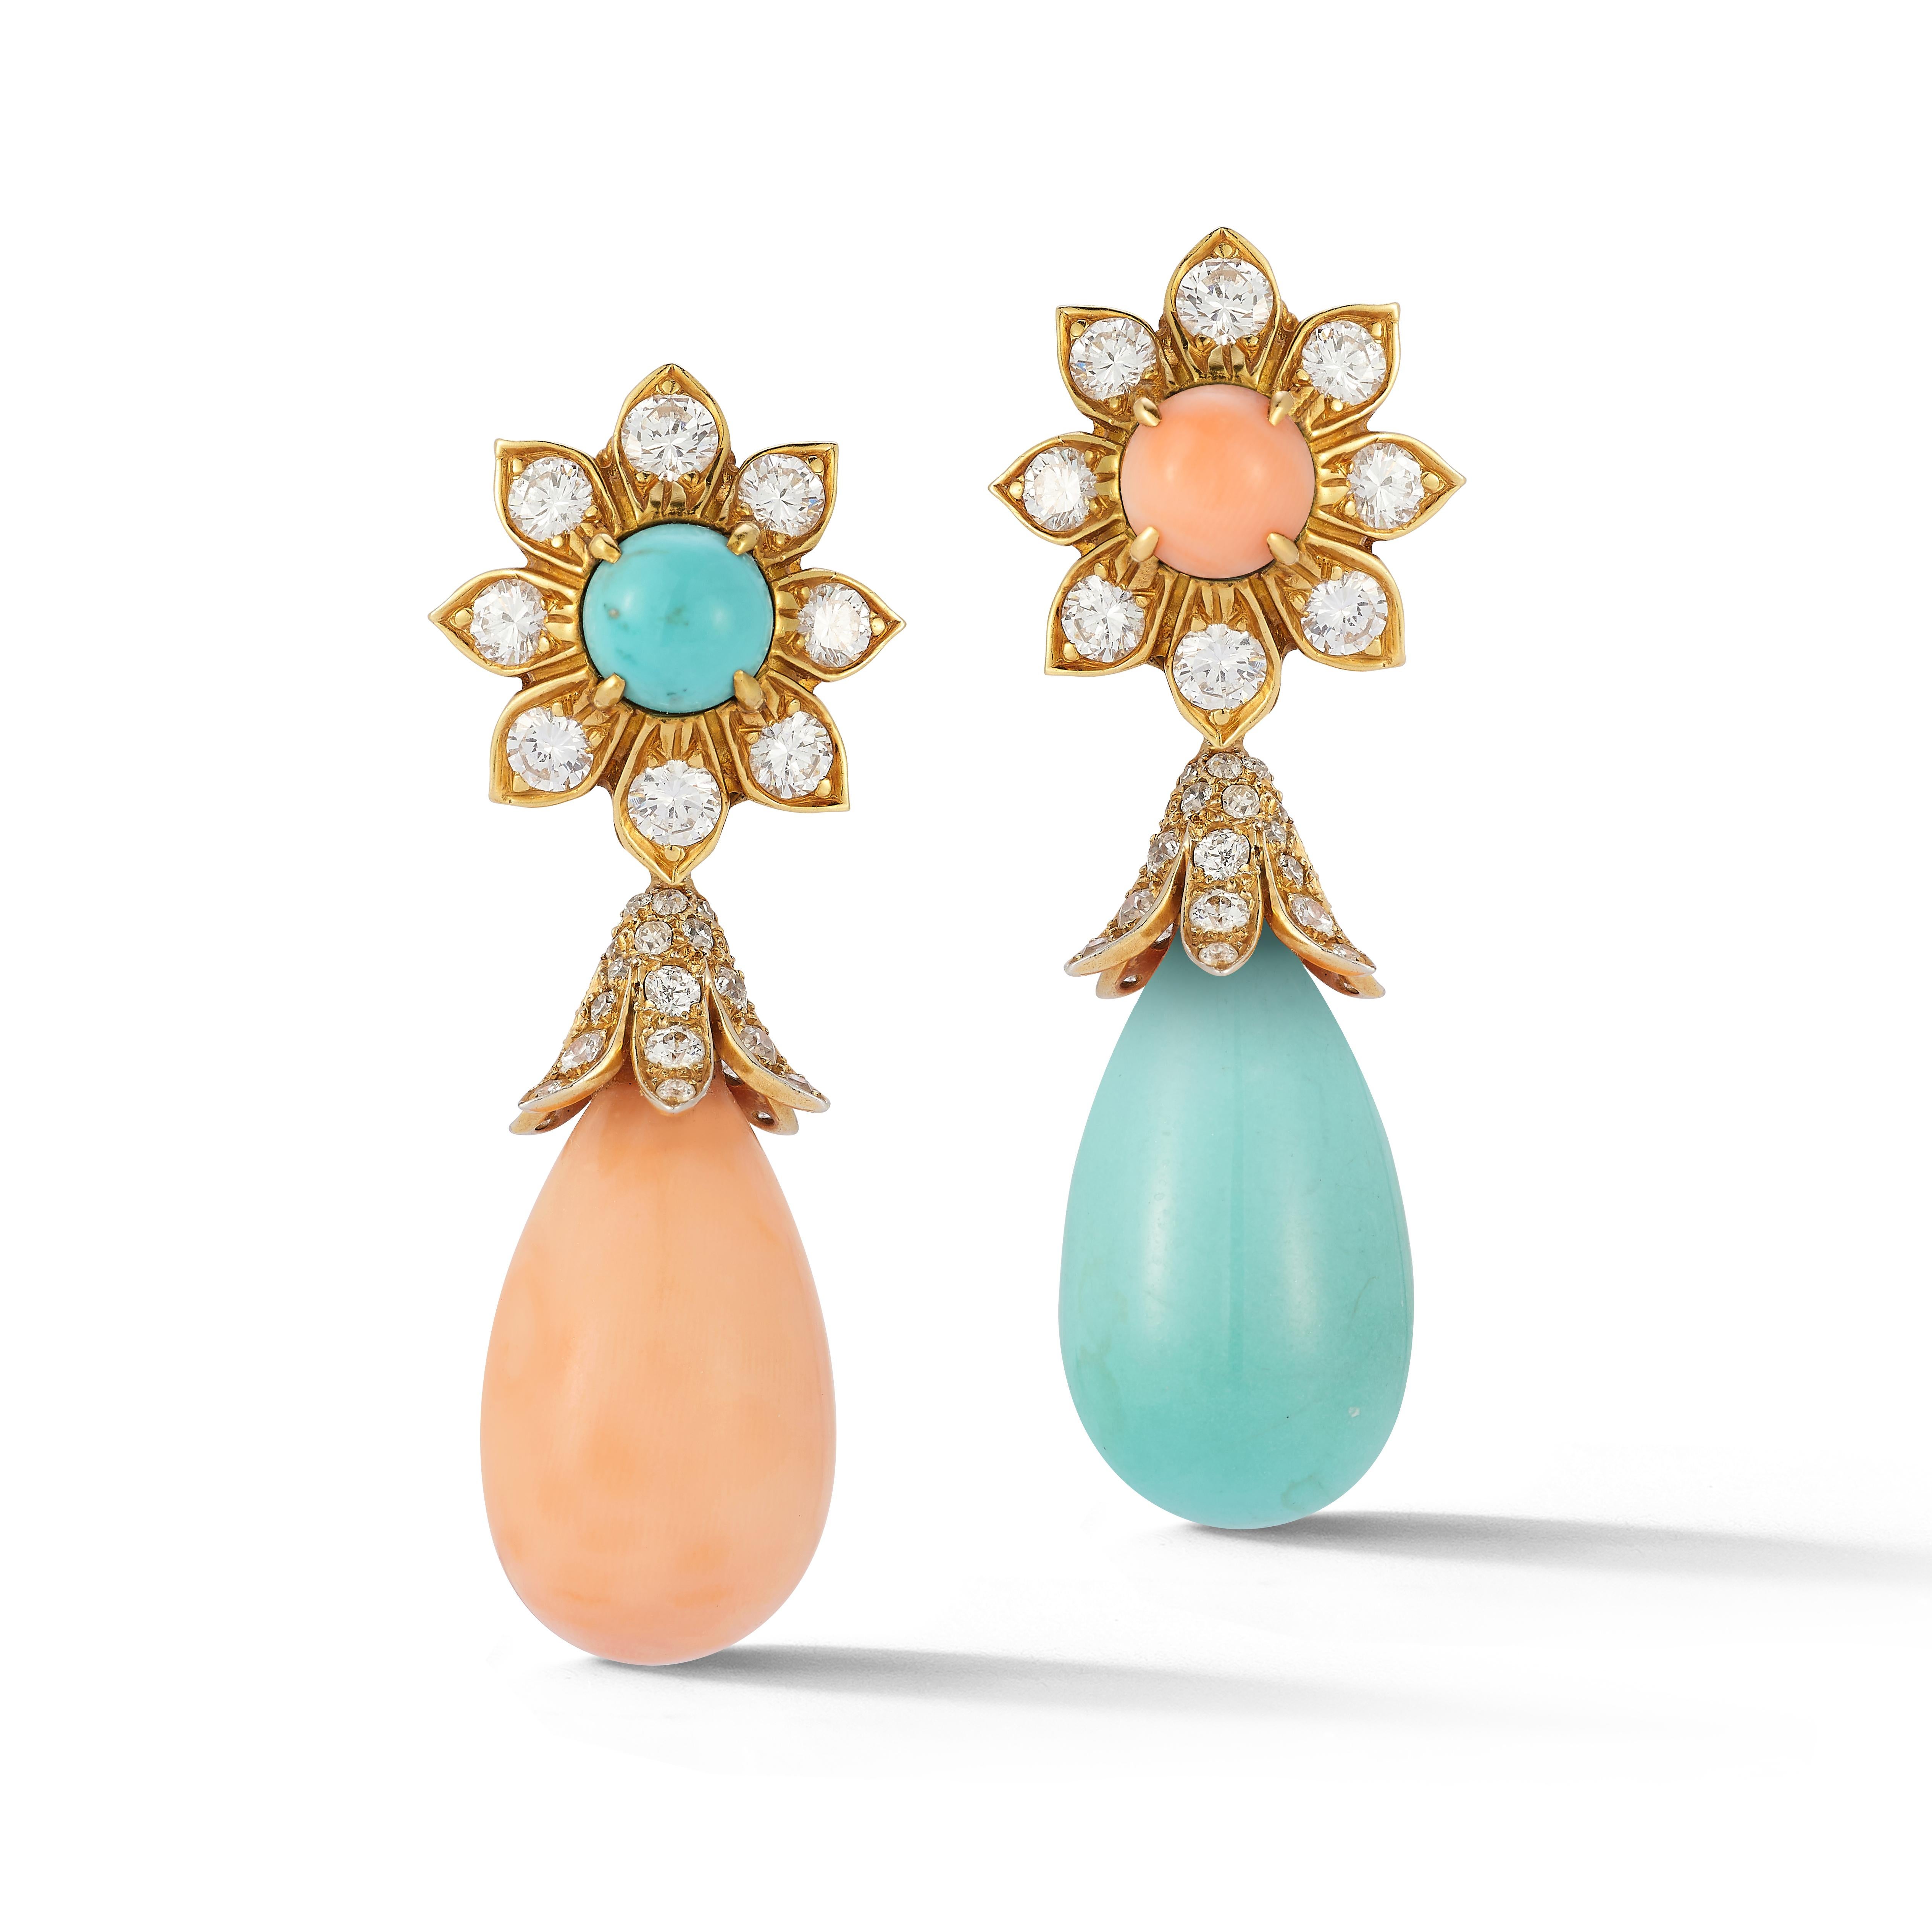 Van Cleef & Arpels Asymmetrical Angel Skin Coral & Turquoise Diamond Day & Night Earrings

A pair of earrings with flower motif daytime elements, one set with a cabochon turquoise and the other set with a cabochon coral, each framed by round cut